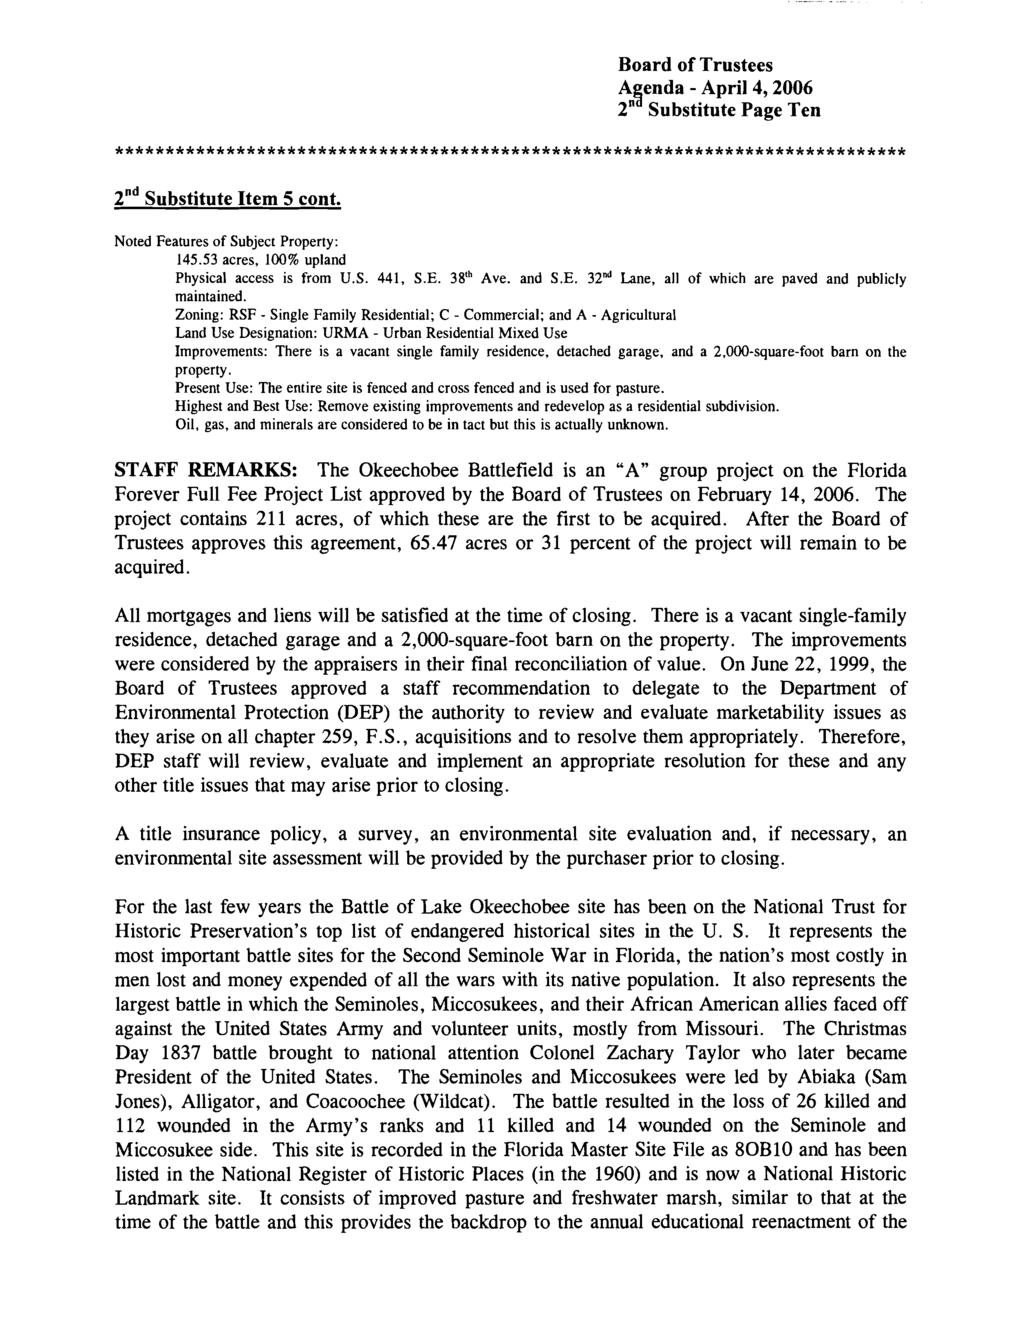 A enda - April 4,2006 2" 4 Substitute Page Ten 2nd Substitute Item 5 cont. Noted Features of Subject Property: 145.53 acres, 100% upland Physical access is from U.S. 441, S.E.